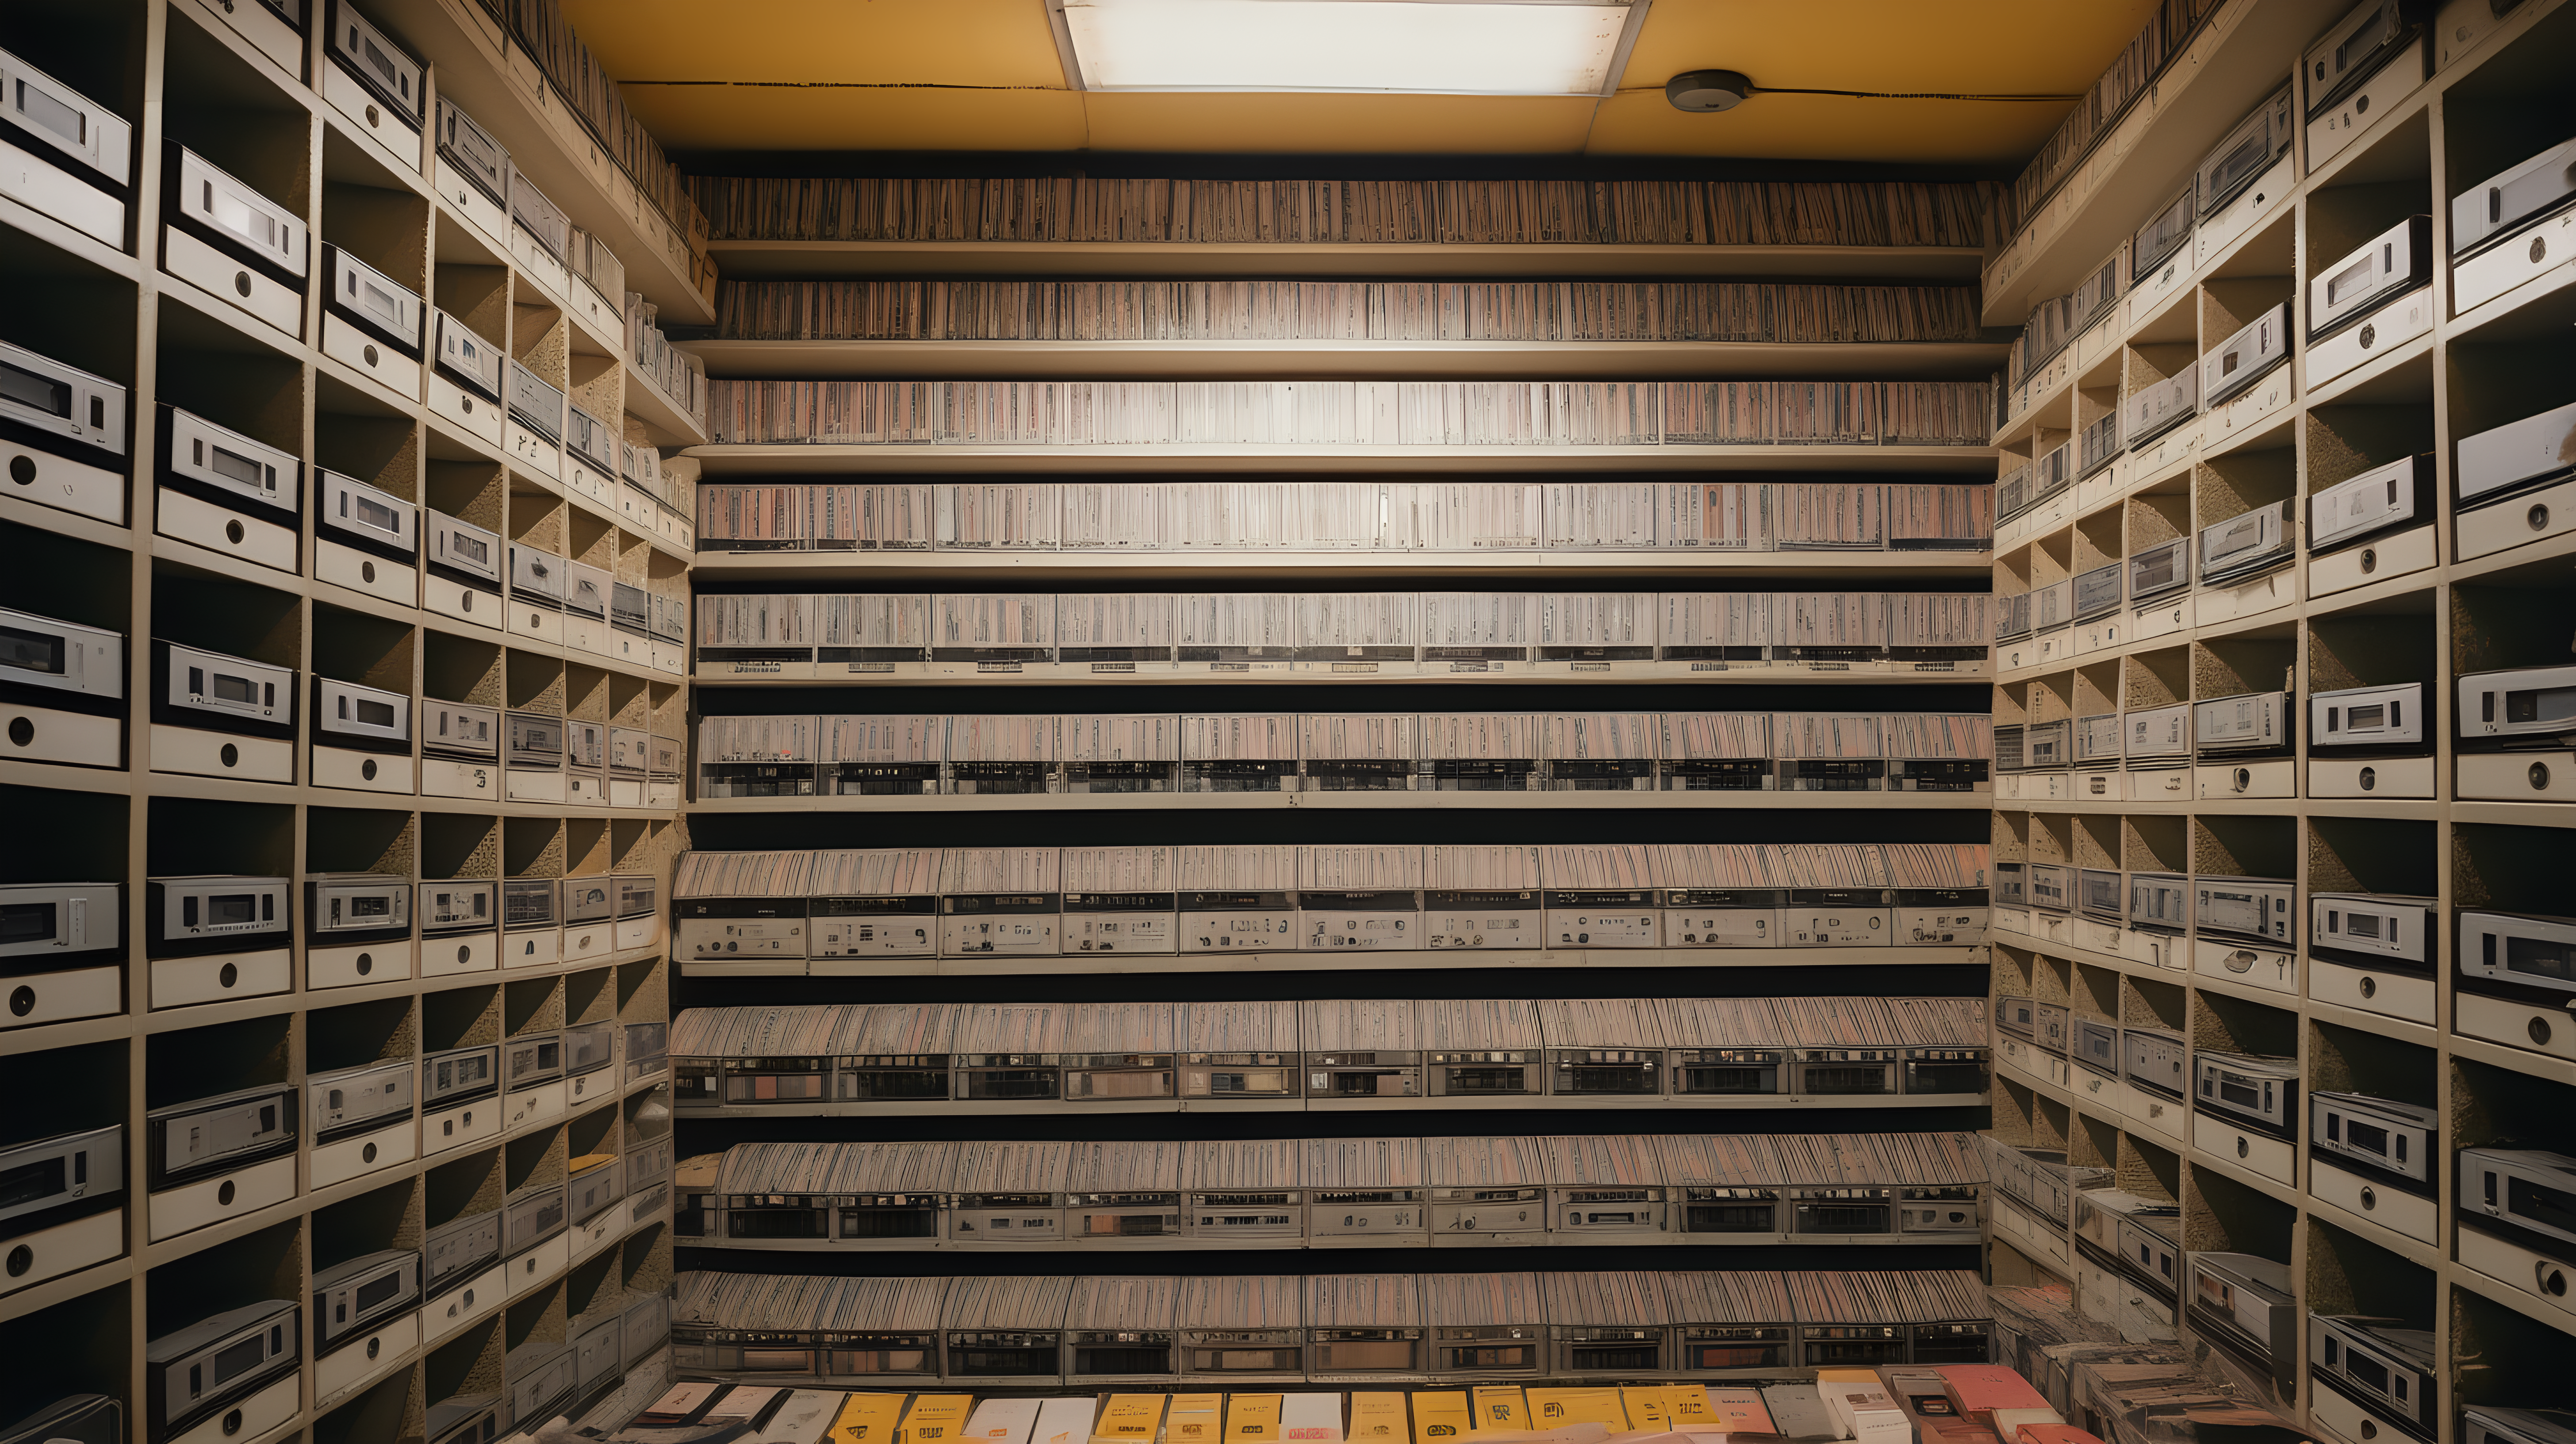 close up, high quality photograph of a cross section of a deep underground bomb shelter full of video cassettes in the style of a wes anderson movie
